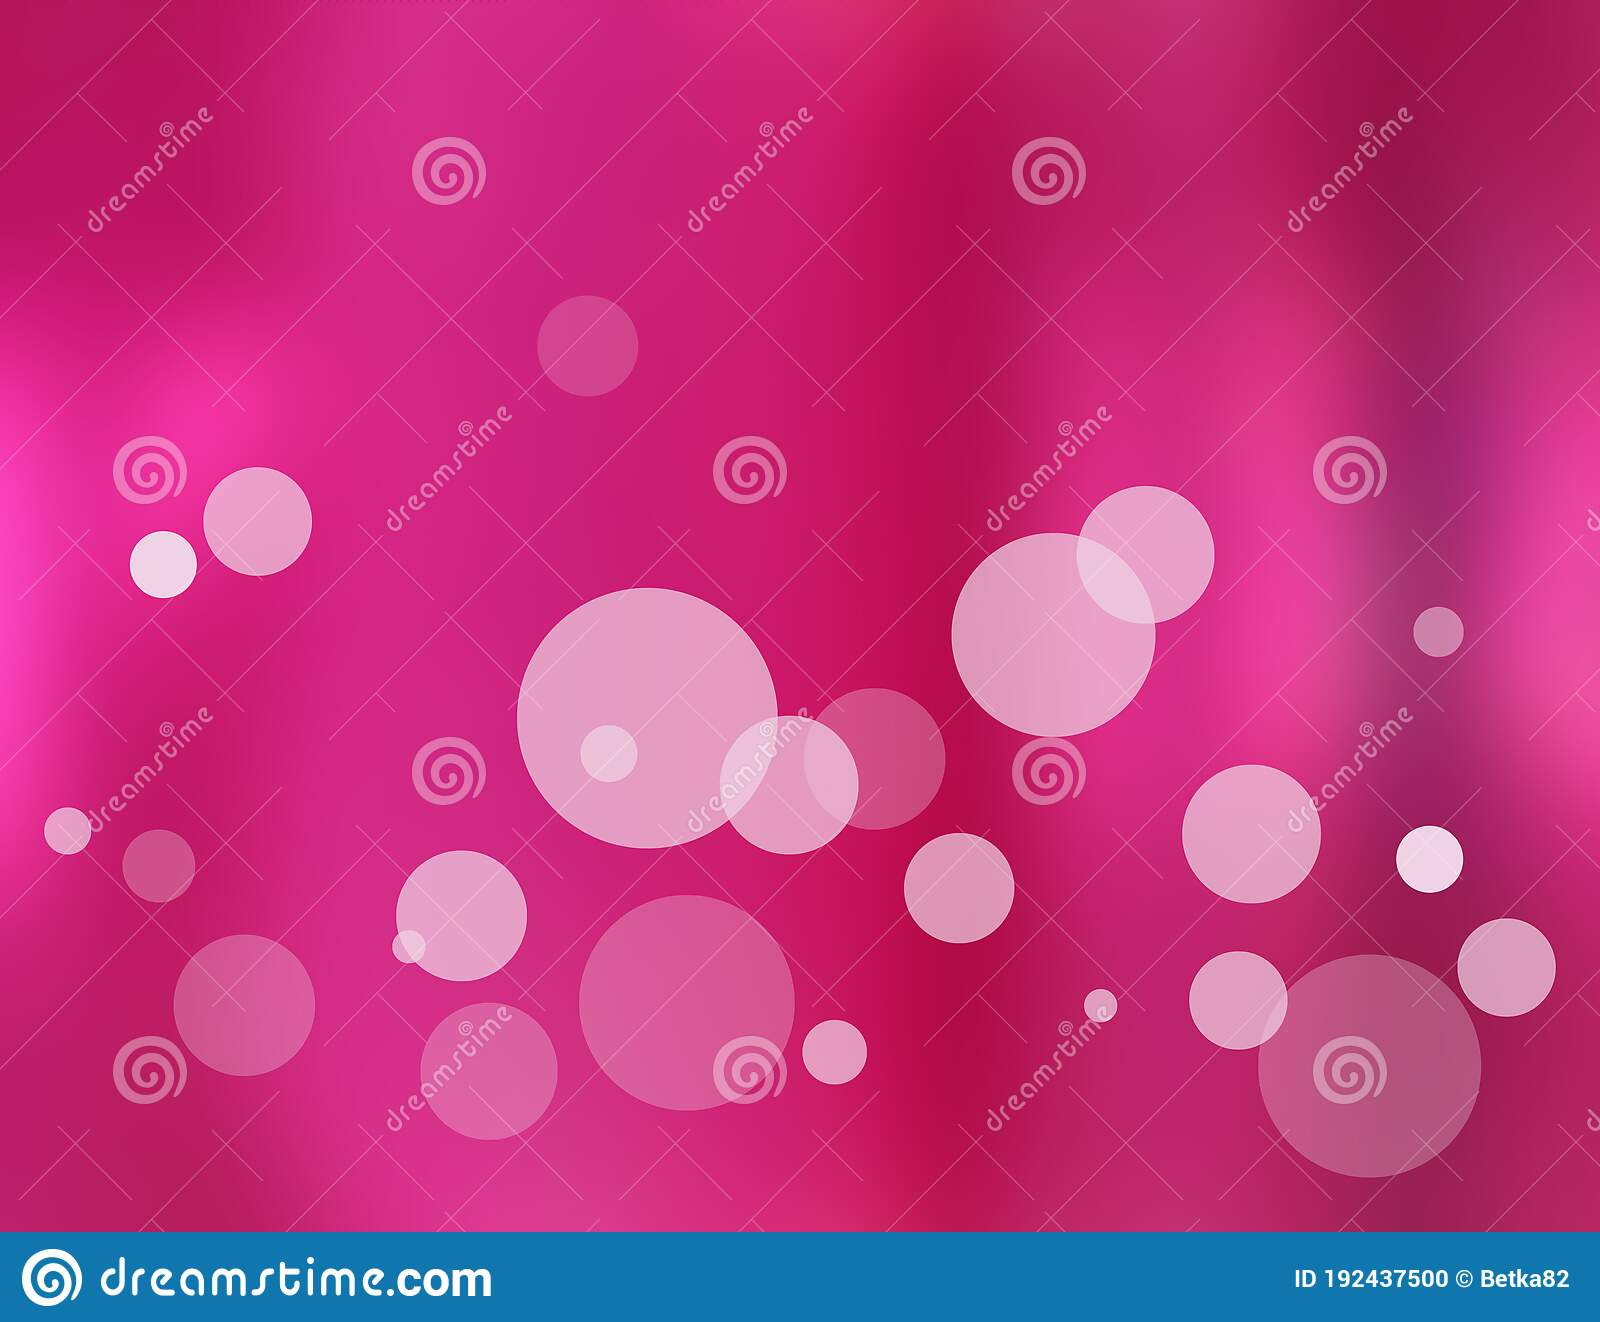 Abstract pink bubble background images stock illustration